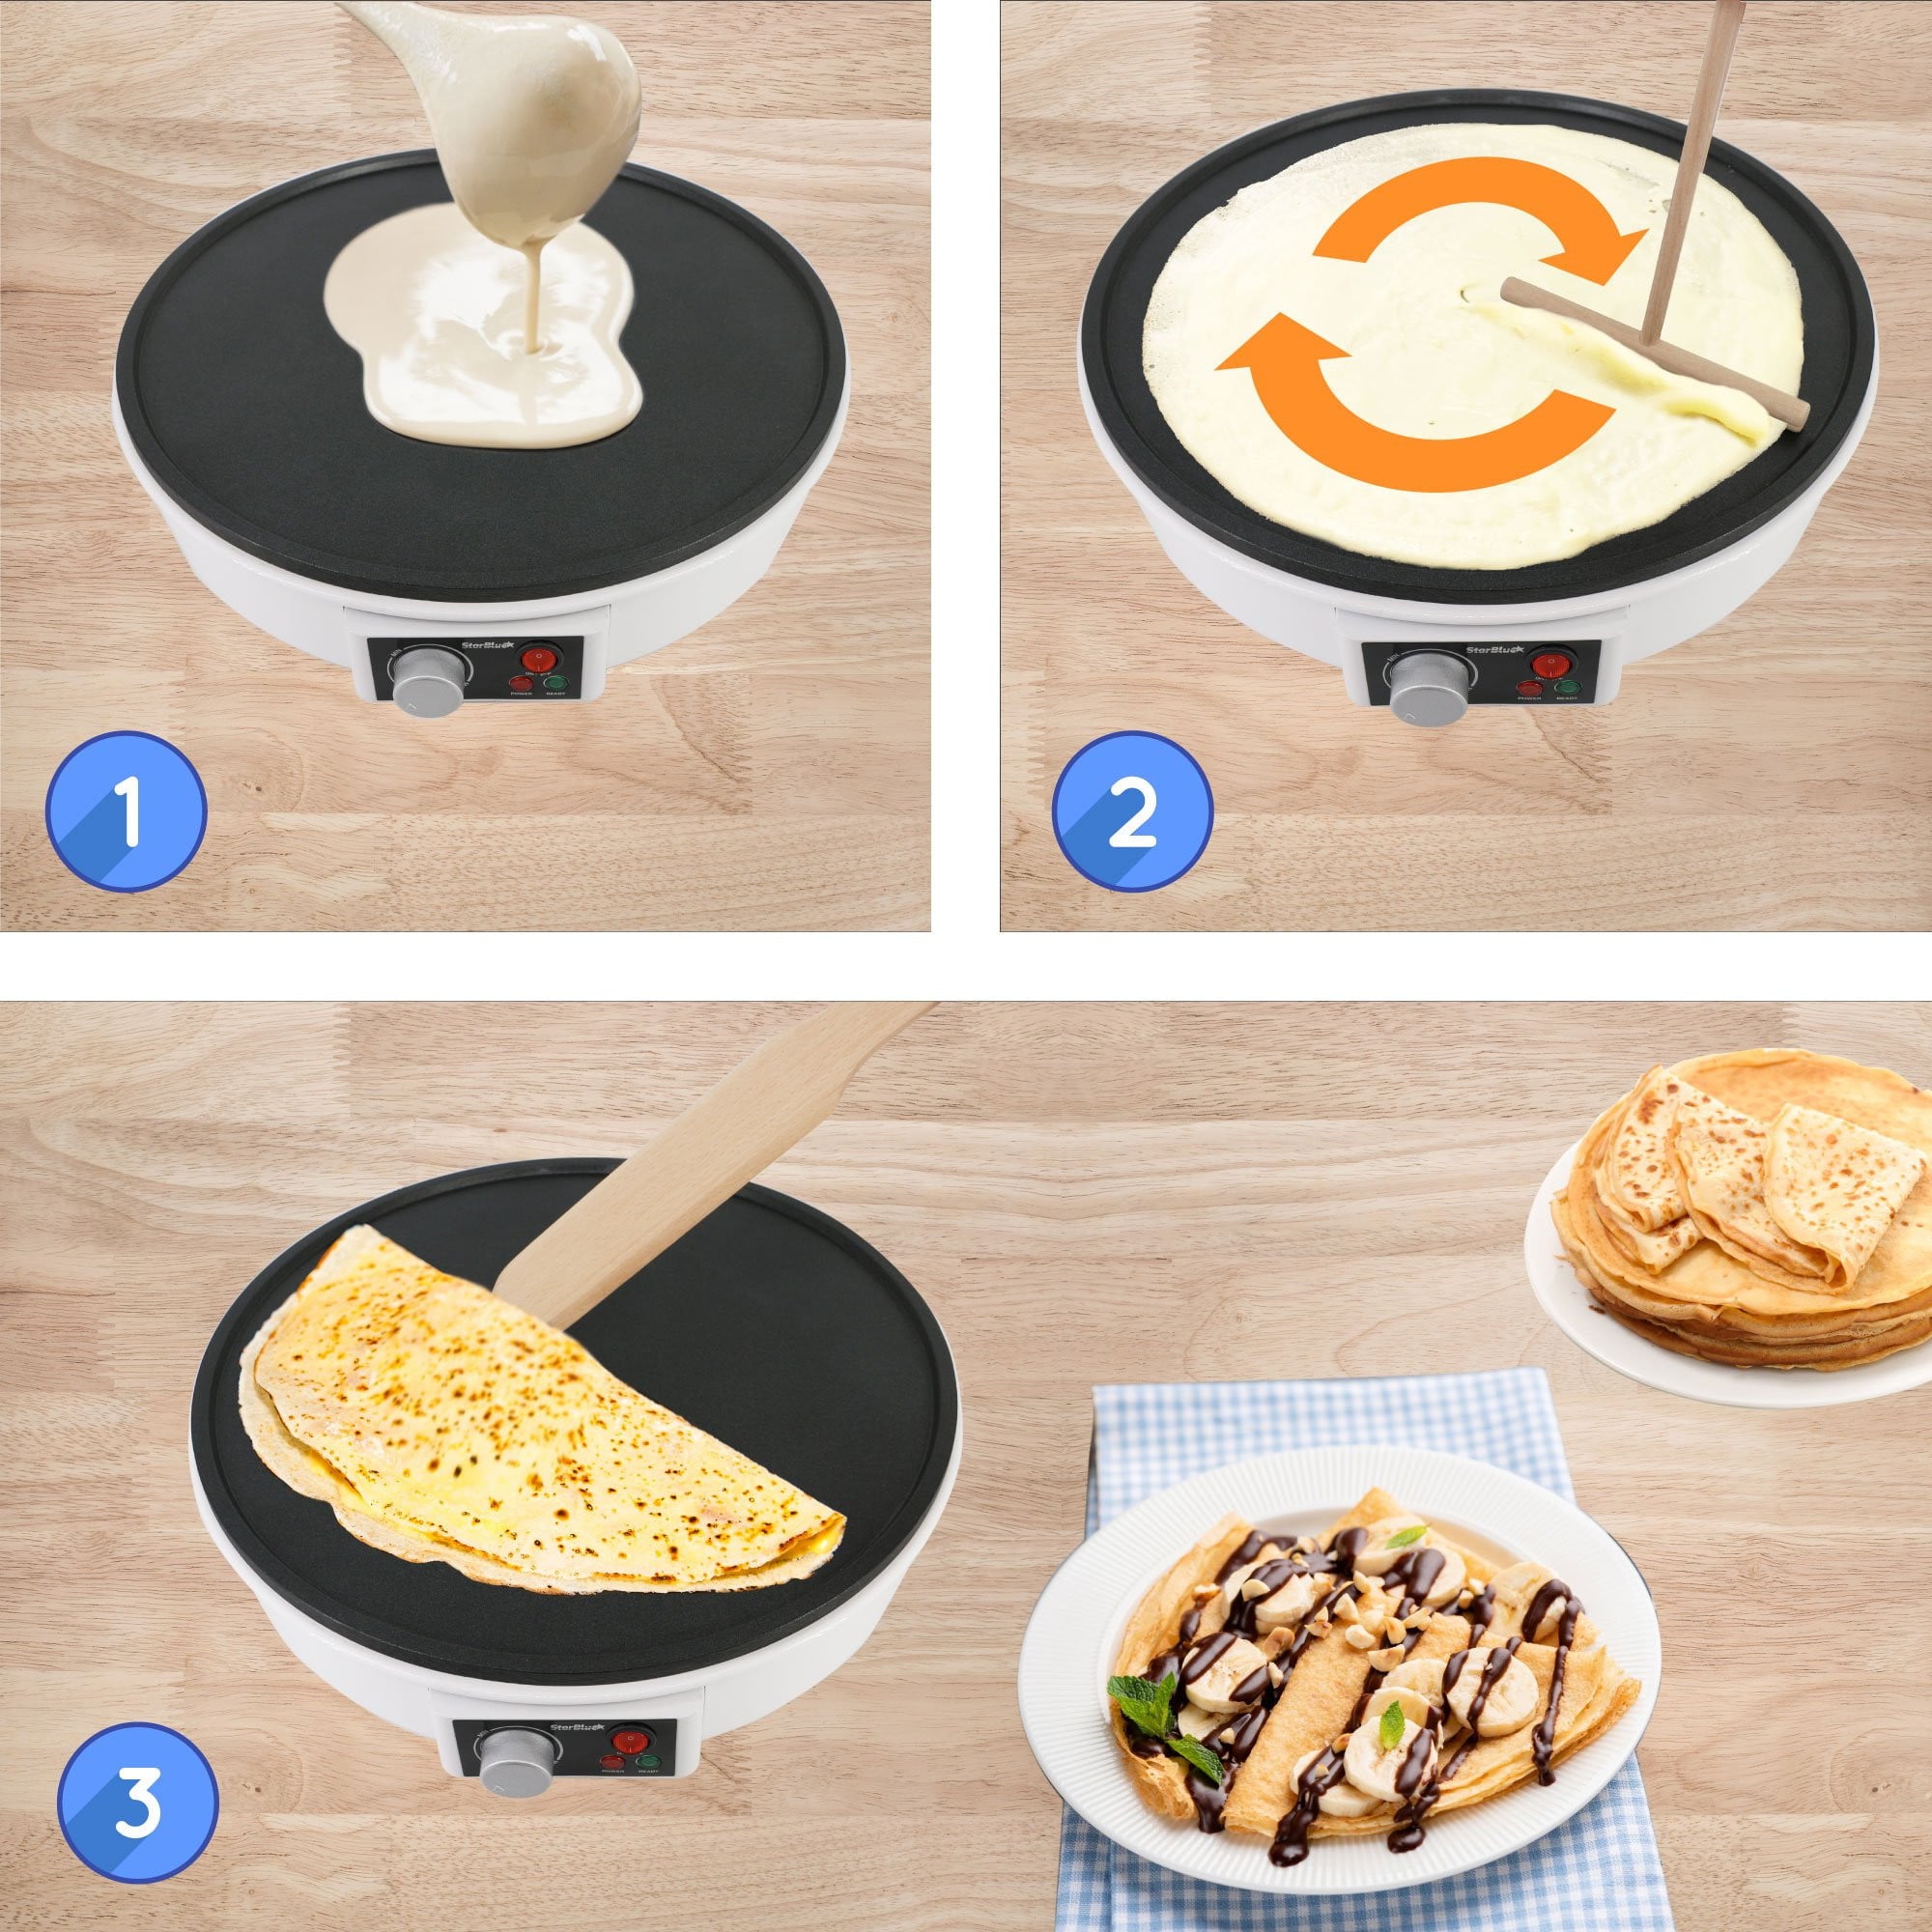 Creative Uses for an Electric Crepe Maker